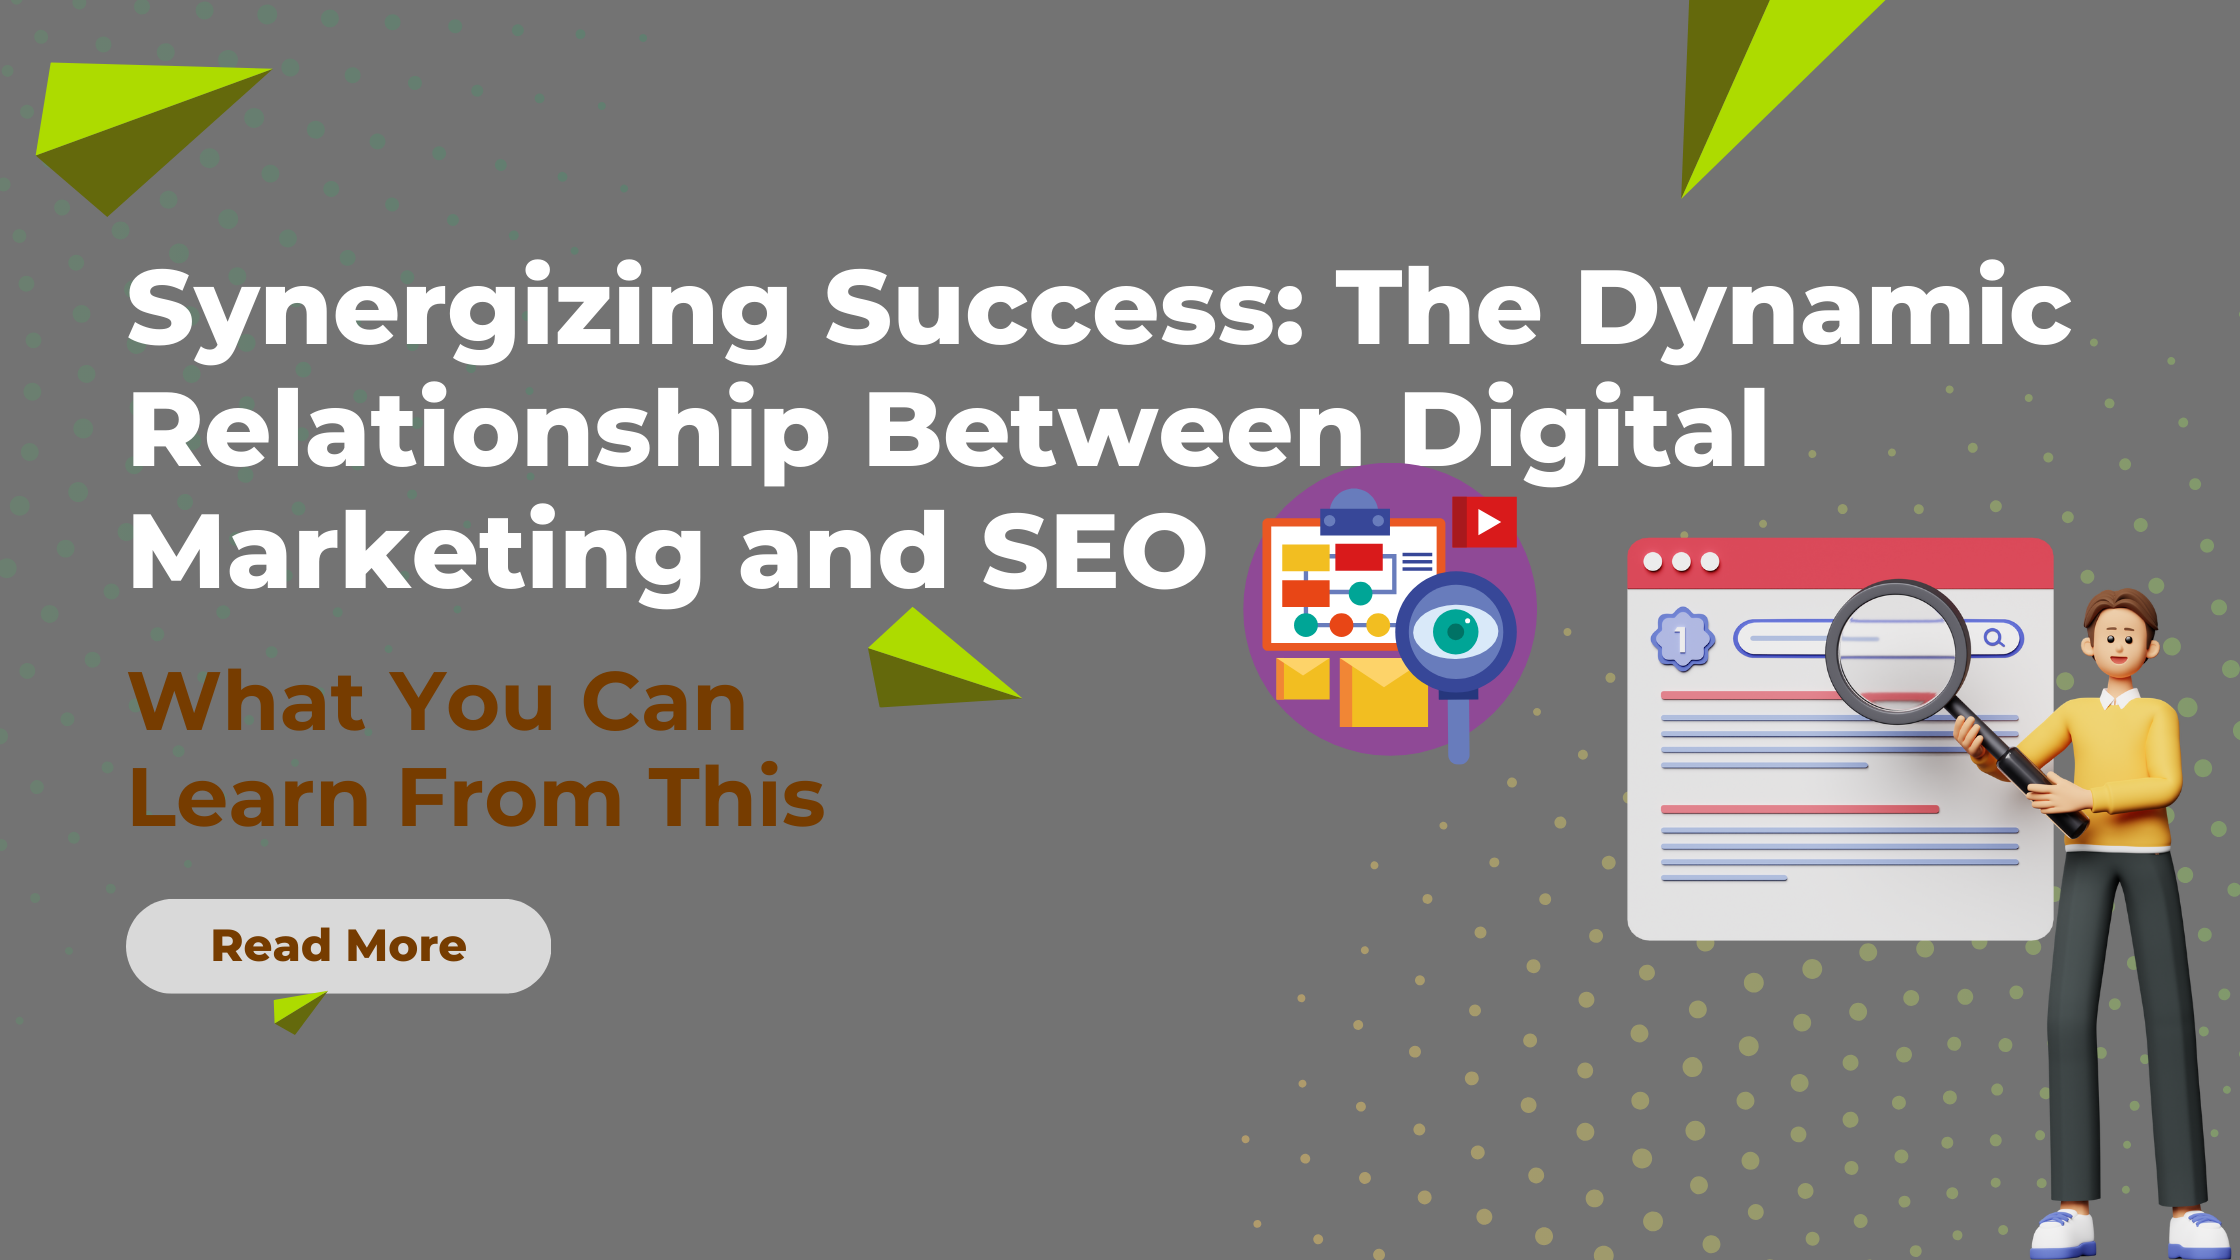 Synergizing Success The Dynamic Relationship Between Digital Marketing and SEO